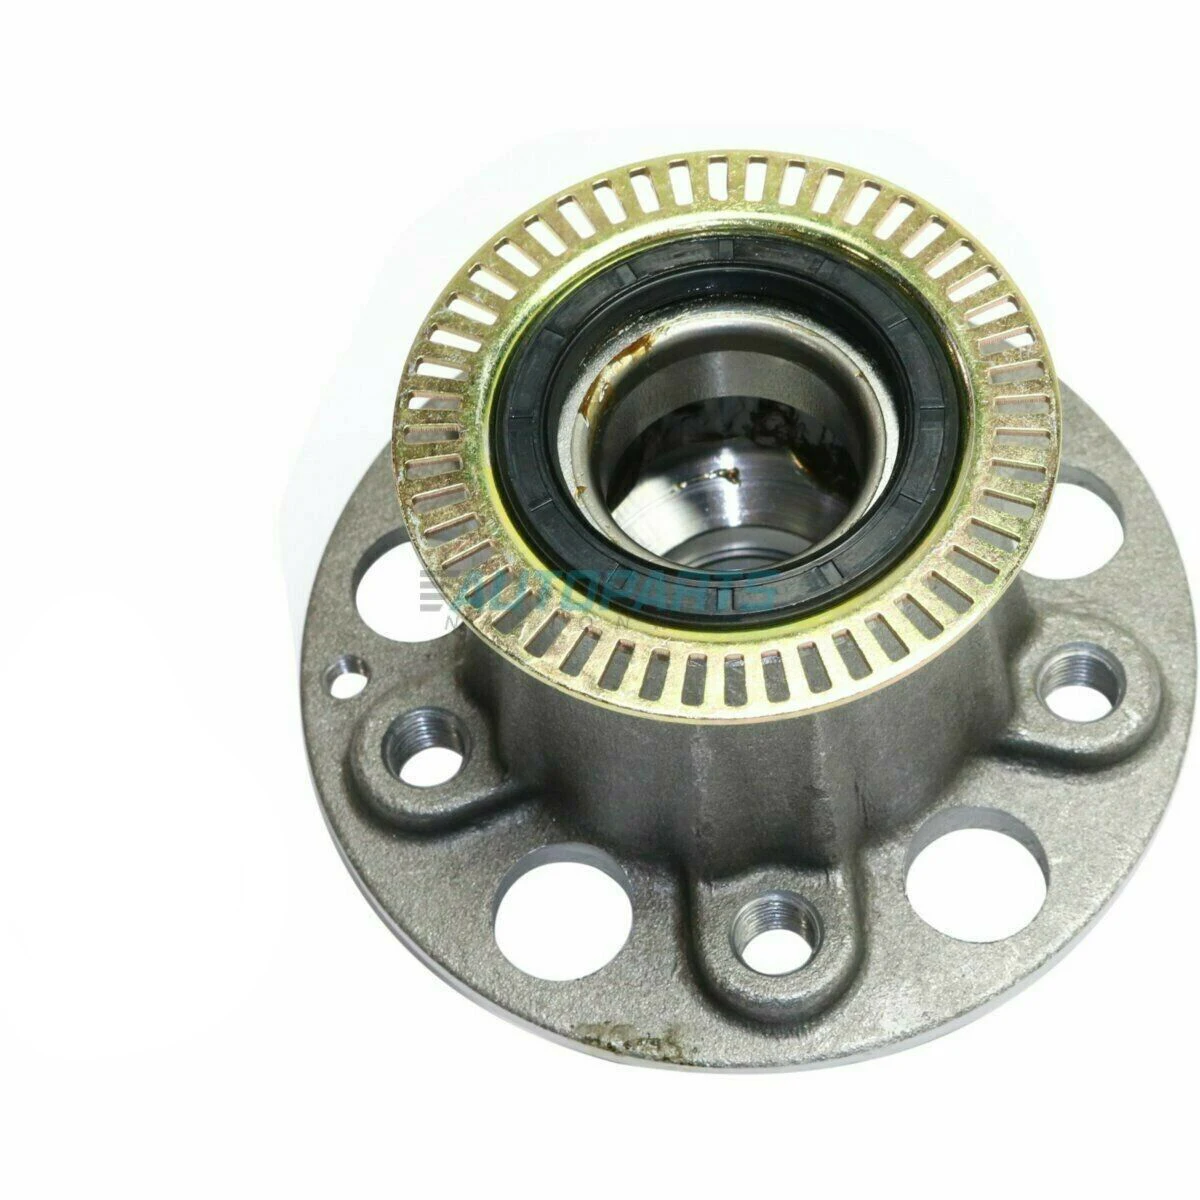 Axle Hub New 1 For CL55 AMG CL600 CL65 AMG S350 S430 S55 AMG S600 S65 Front 